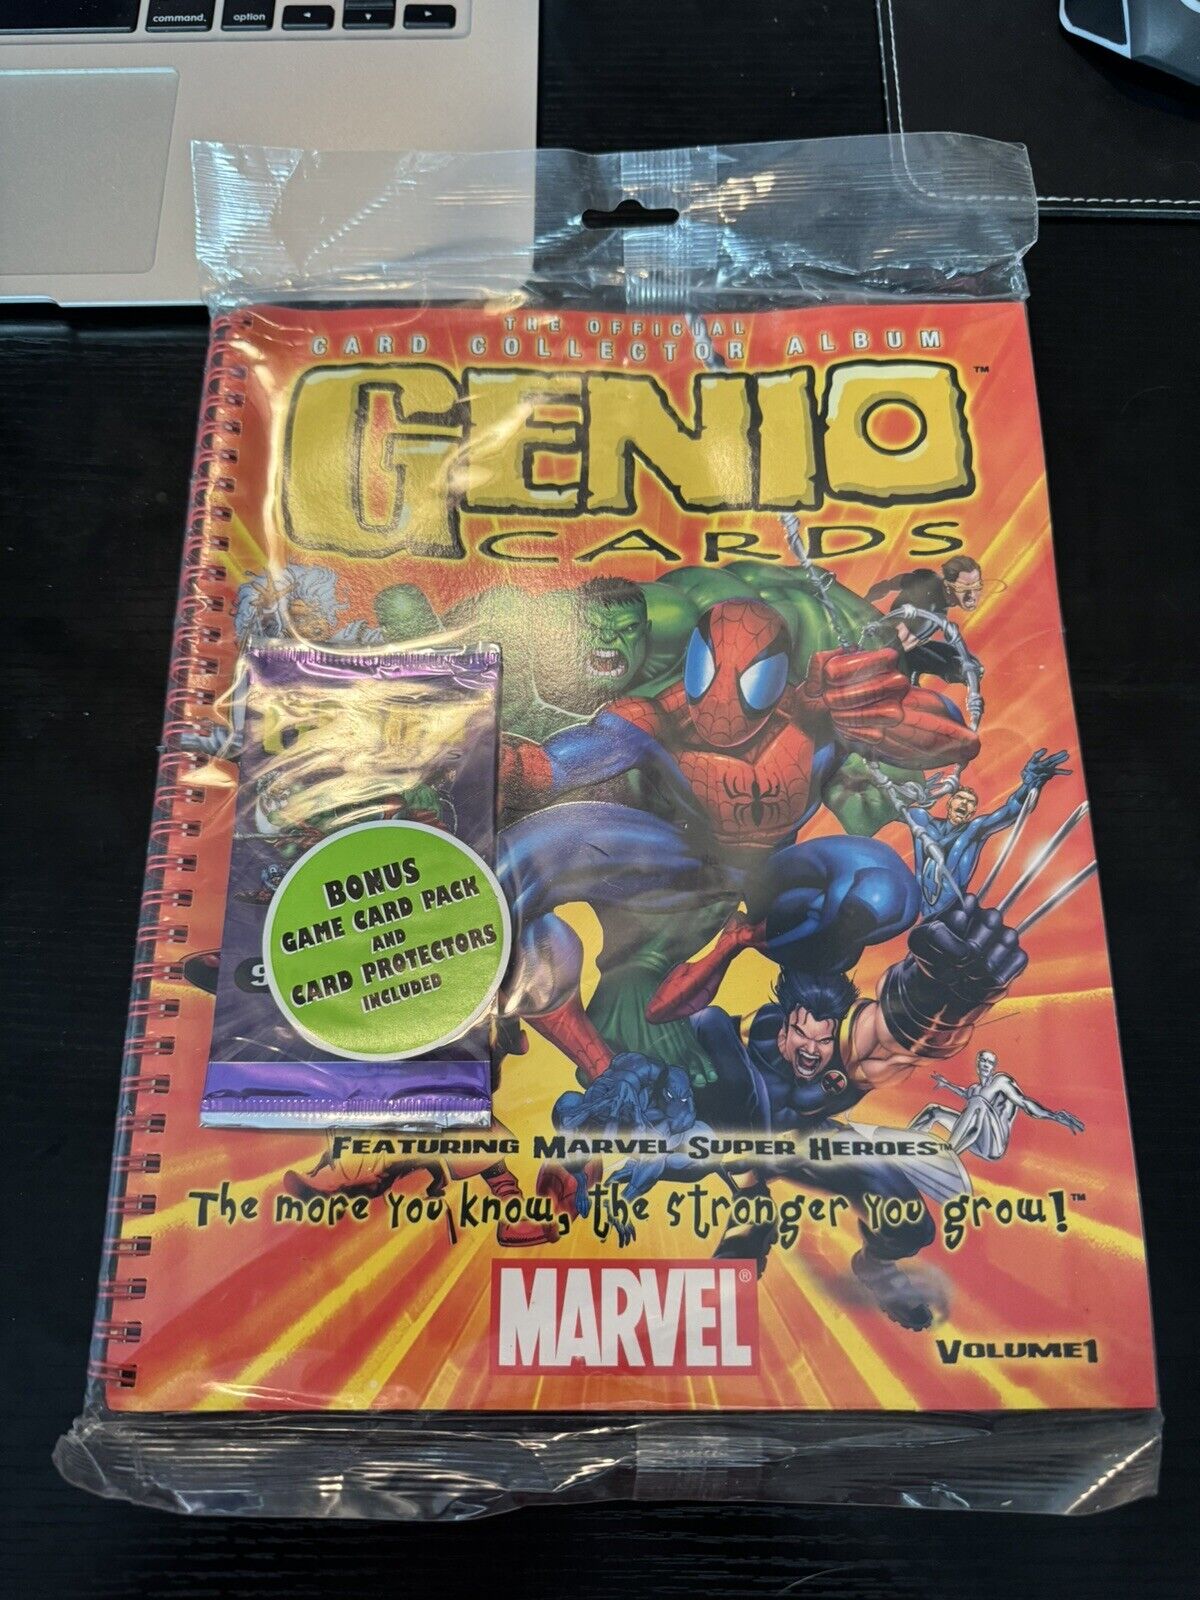 GENIO CARDS THE OFFICIAL CARD COLLECTOR ALBUM PURPLE PAPERBACK NEW SEALED MARVEL